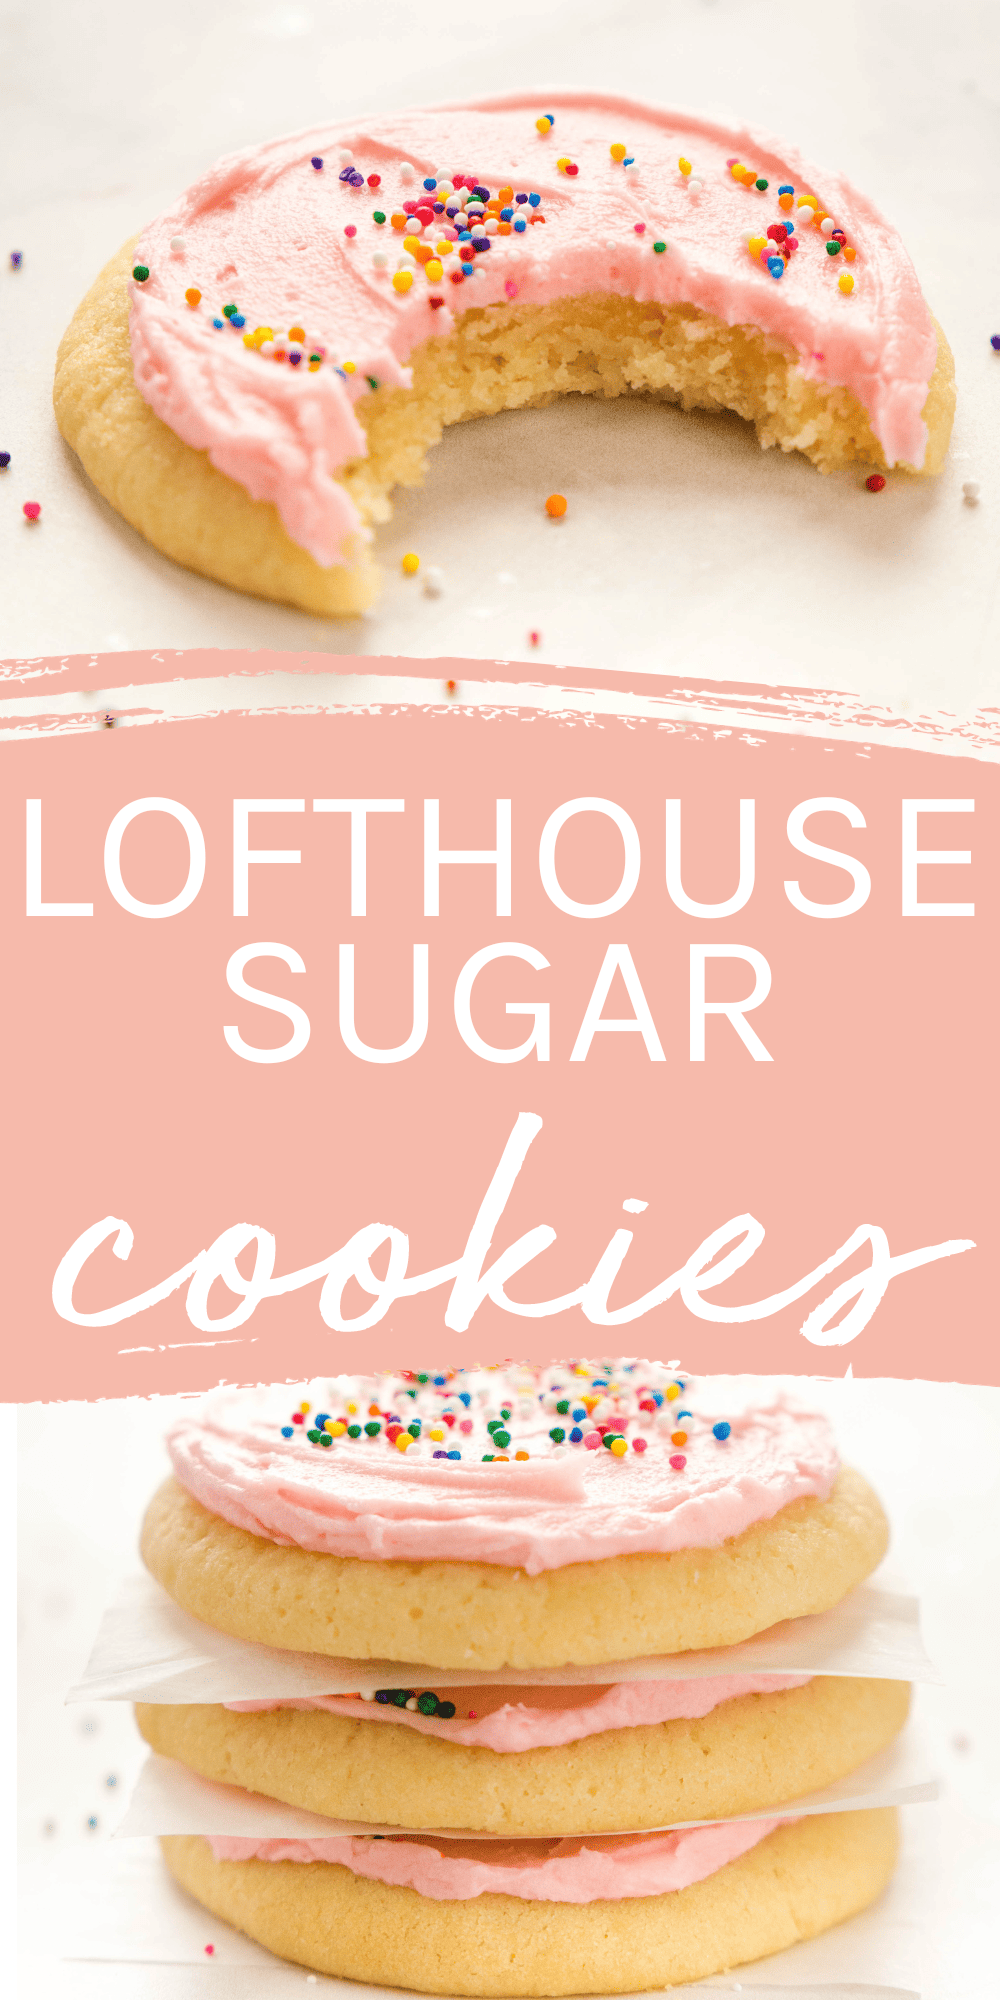 This Lofthouse Cookies recipe makes the best soft & chewy sugar cookies with an easy fluffy frosting and sprinkles. They're easy to make, with no rolling or chilling required! The BEST Lofthouse cookie recipe - with pro tips! Recipe from thebusybaker.ca! #lofthousecopycat #copycatrecipe #sugarcookies #sweets #frostedcookies #soft #chewy #homemade #holiday #Christmas #dessert #pink #birthday #swig #cookies #cookie #recipe #foodblog #easyrecipe #baking via @busybakerblog